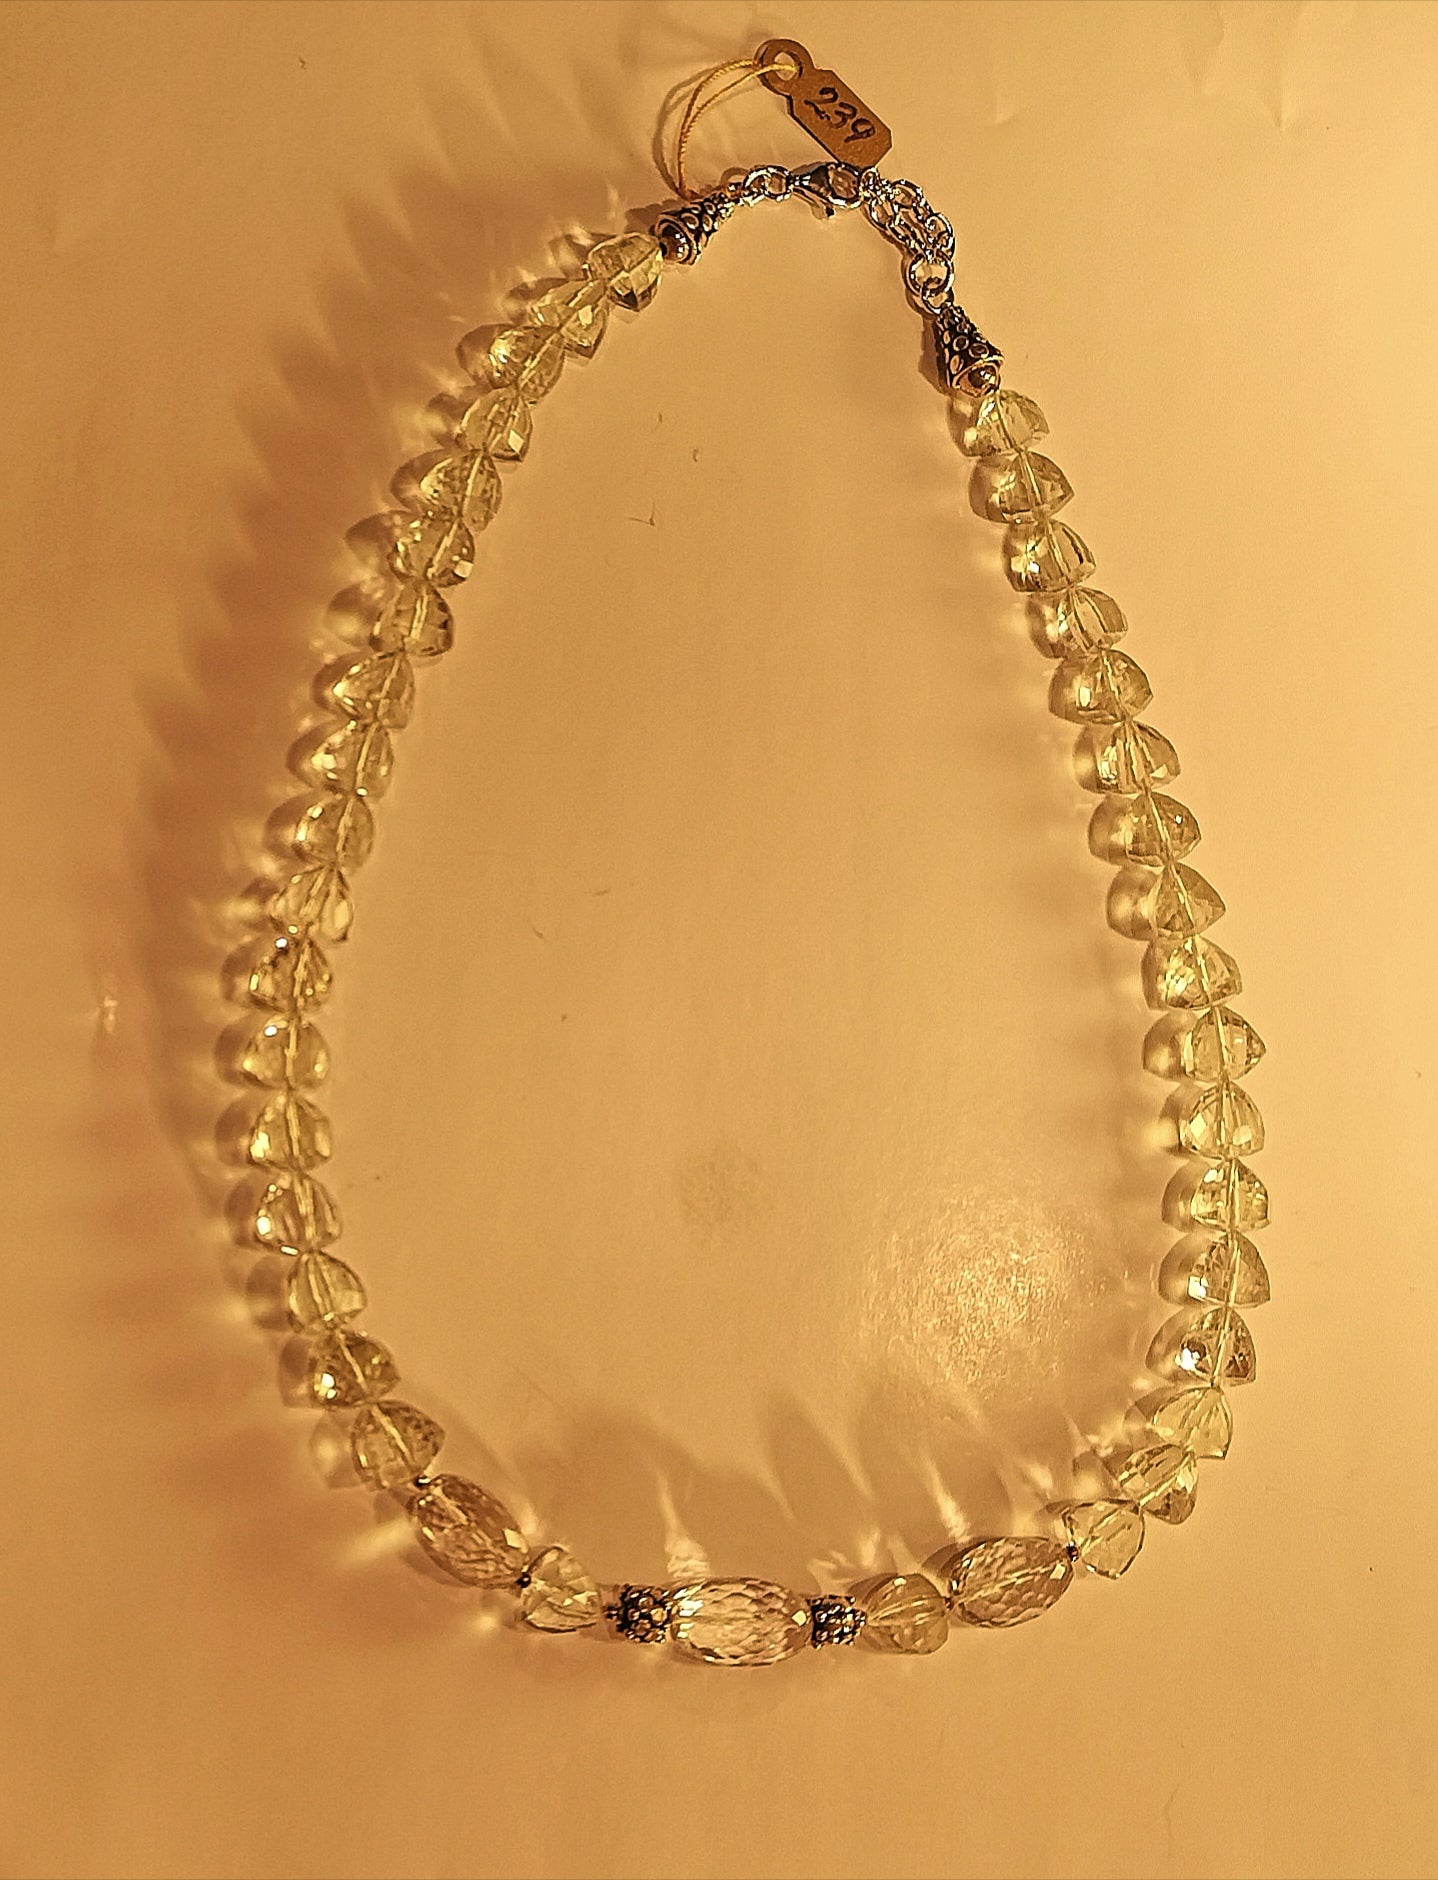 Green amethyst faceted stone necklace with sterling silver beads and extending chain.